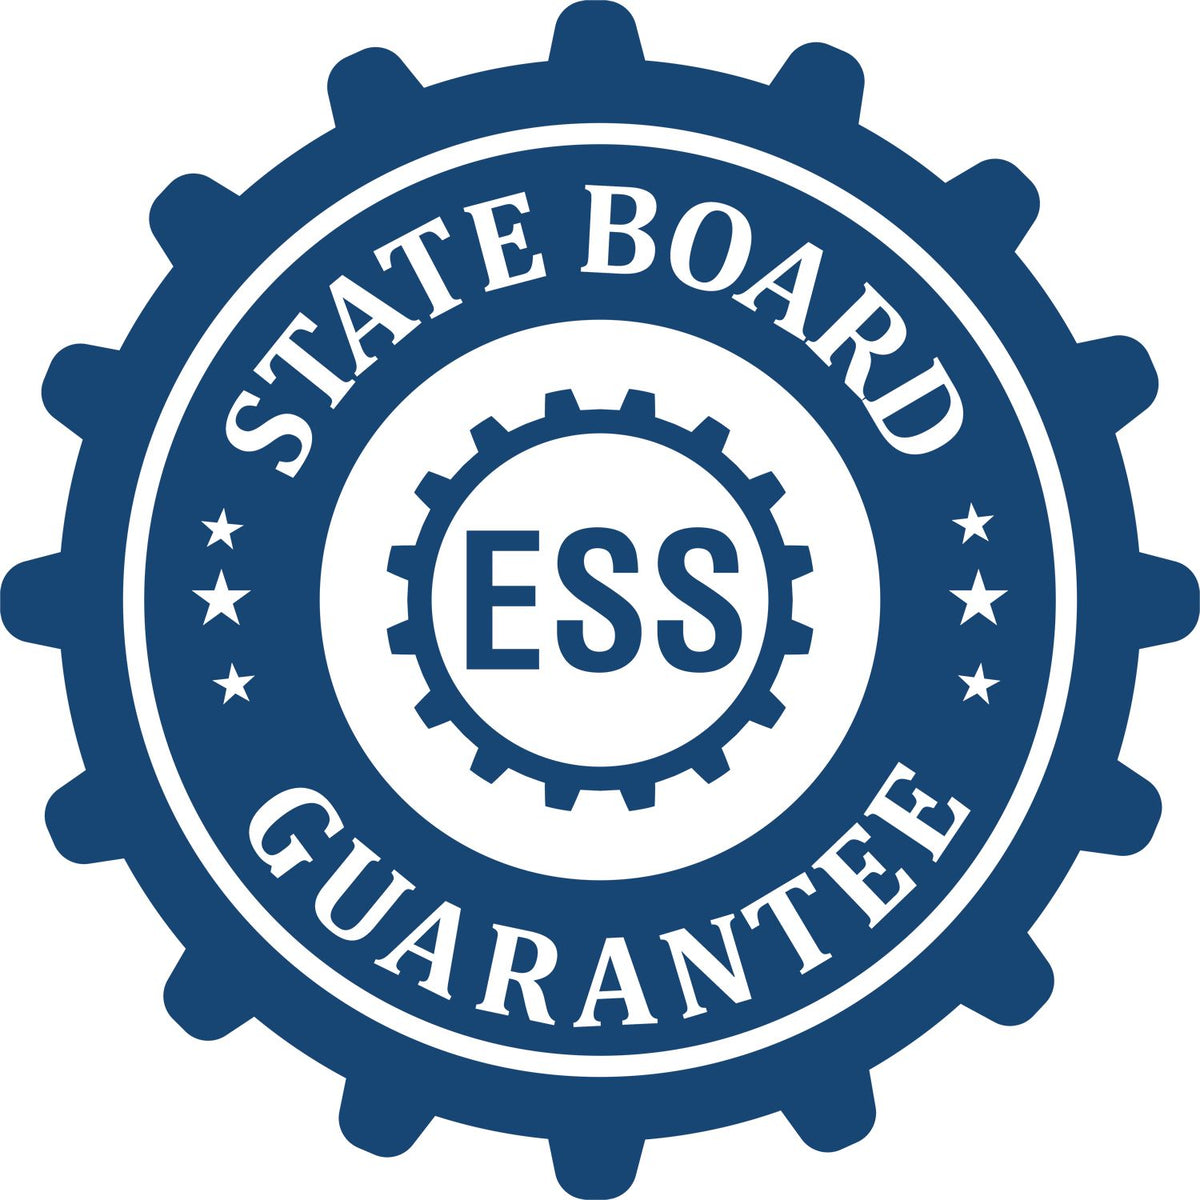 An emblem in a gear shape illustrating a state board guarantee for the Gift Mississippi Engineer Seal